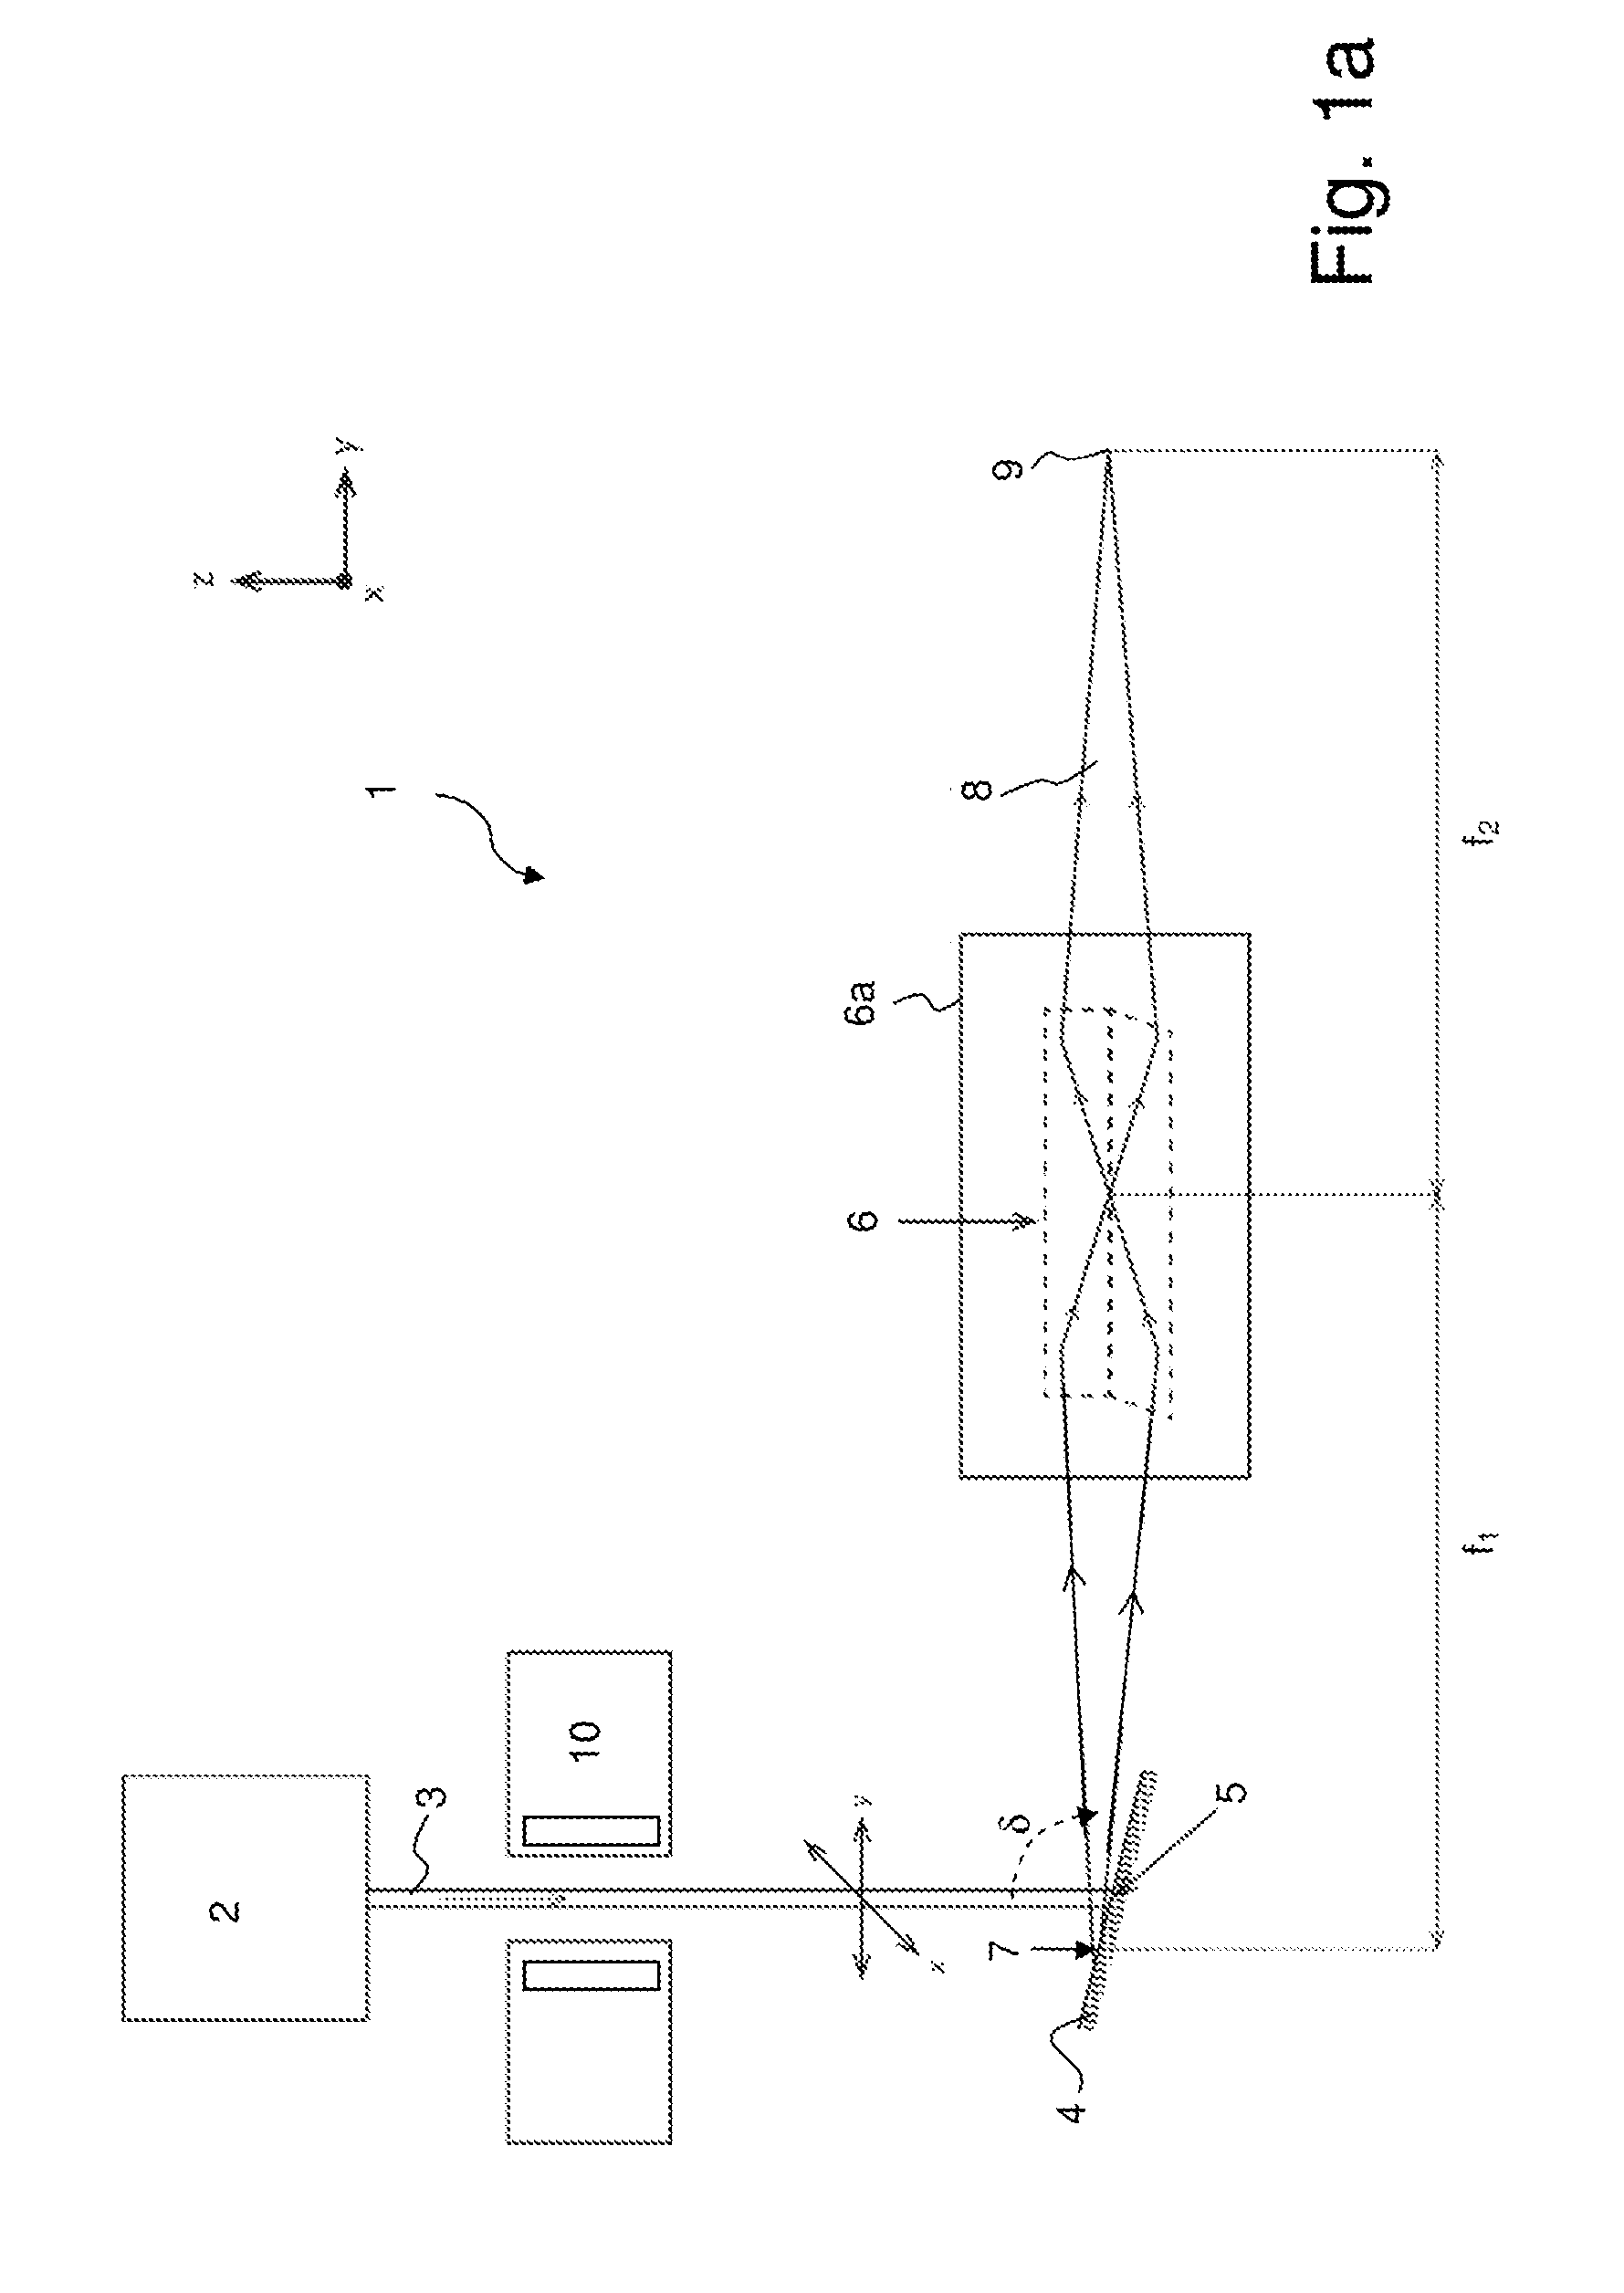 X-ray apparatus with deflectable electron beam